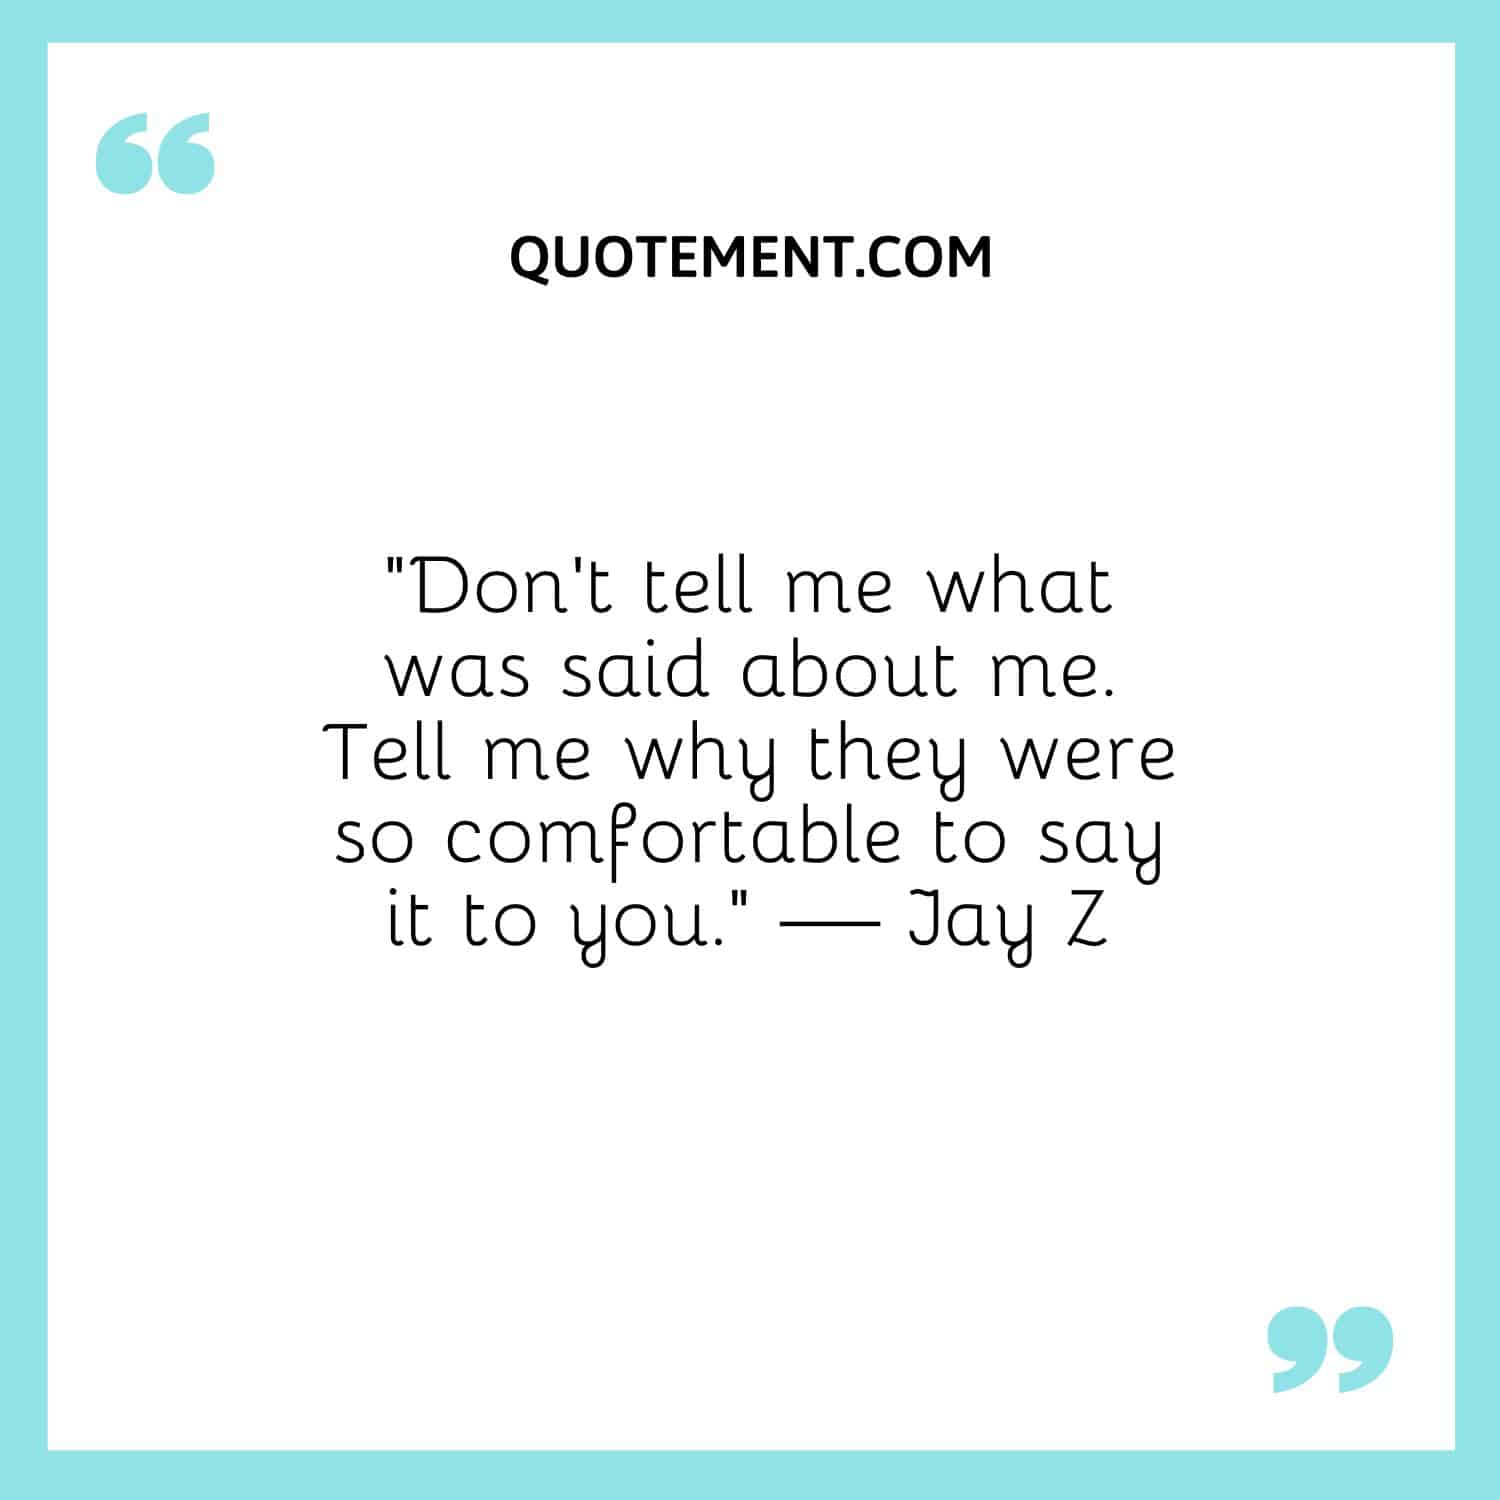 “Don’t tell me what was said about me. Tell me why they were so comfortable to say it to you.” — Jay Z